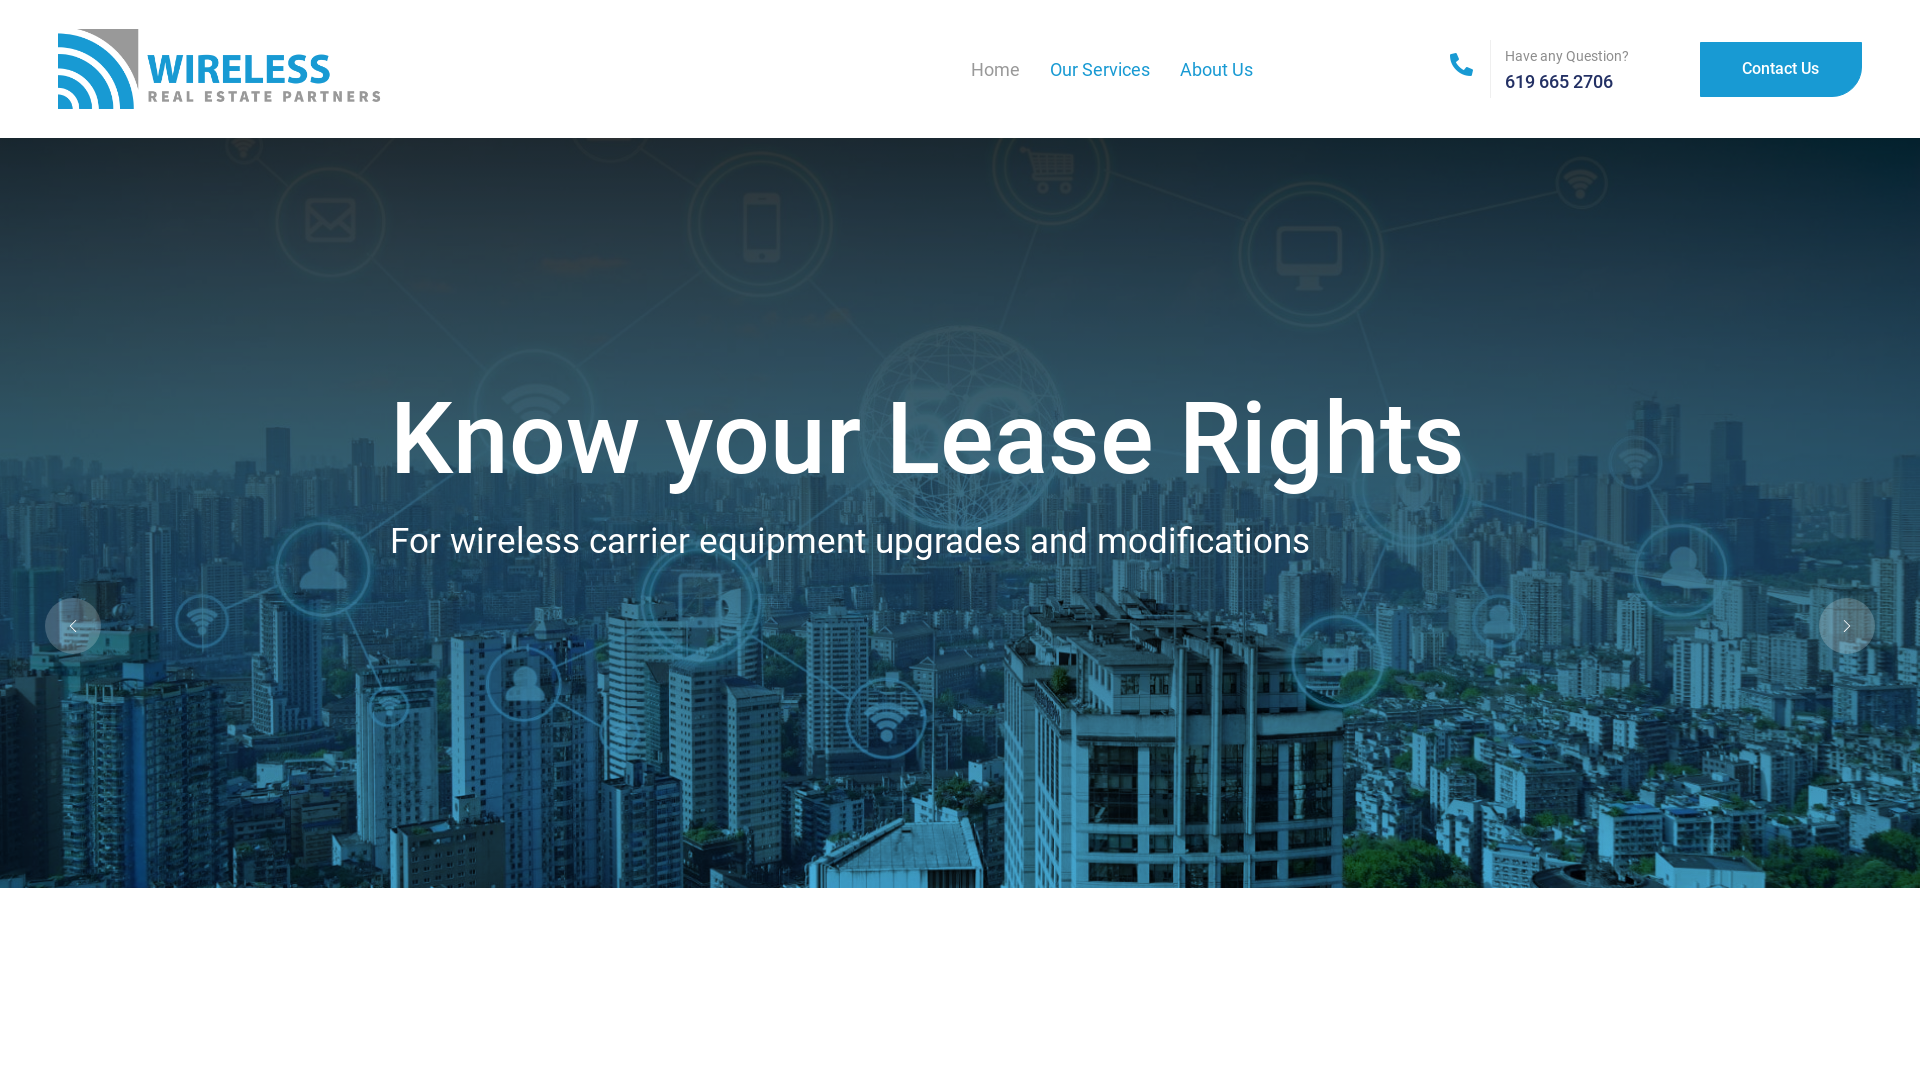 Wireless Real Estate Partners